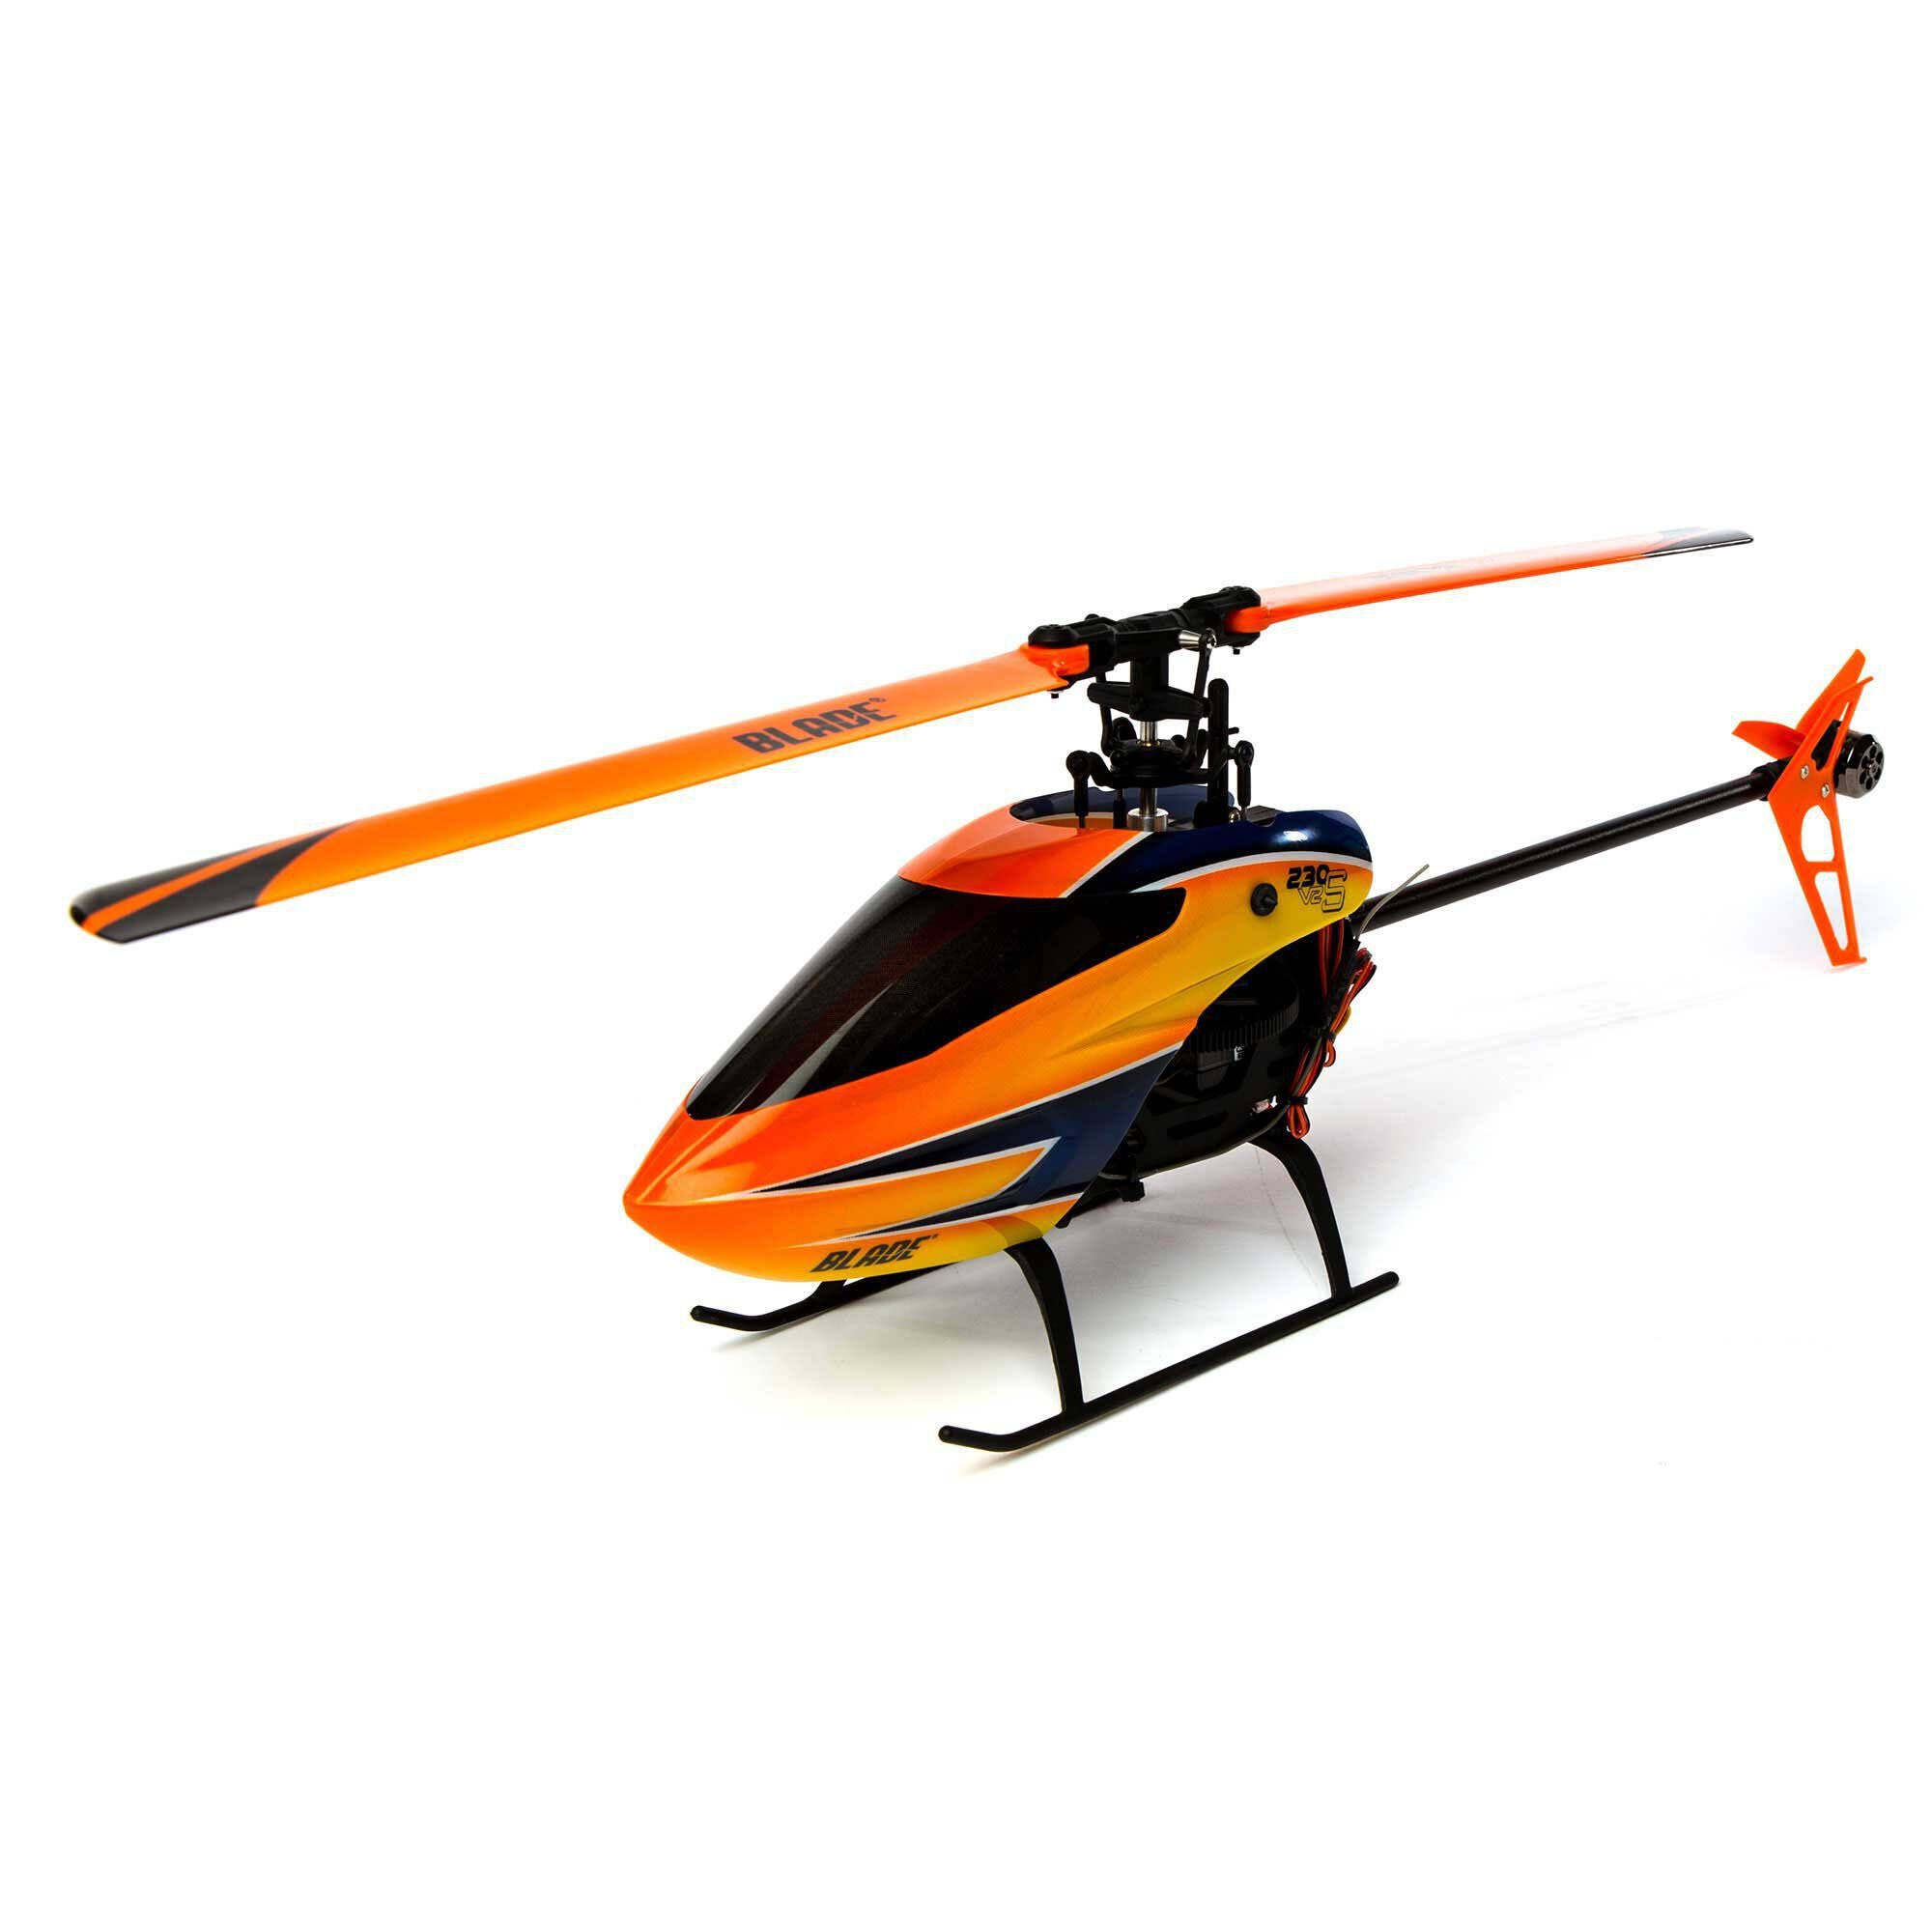 Blade 230 S RC Helicopter with Smart Technology BNF Basic BLH1250